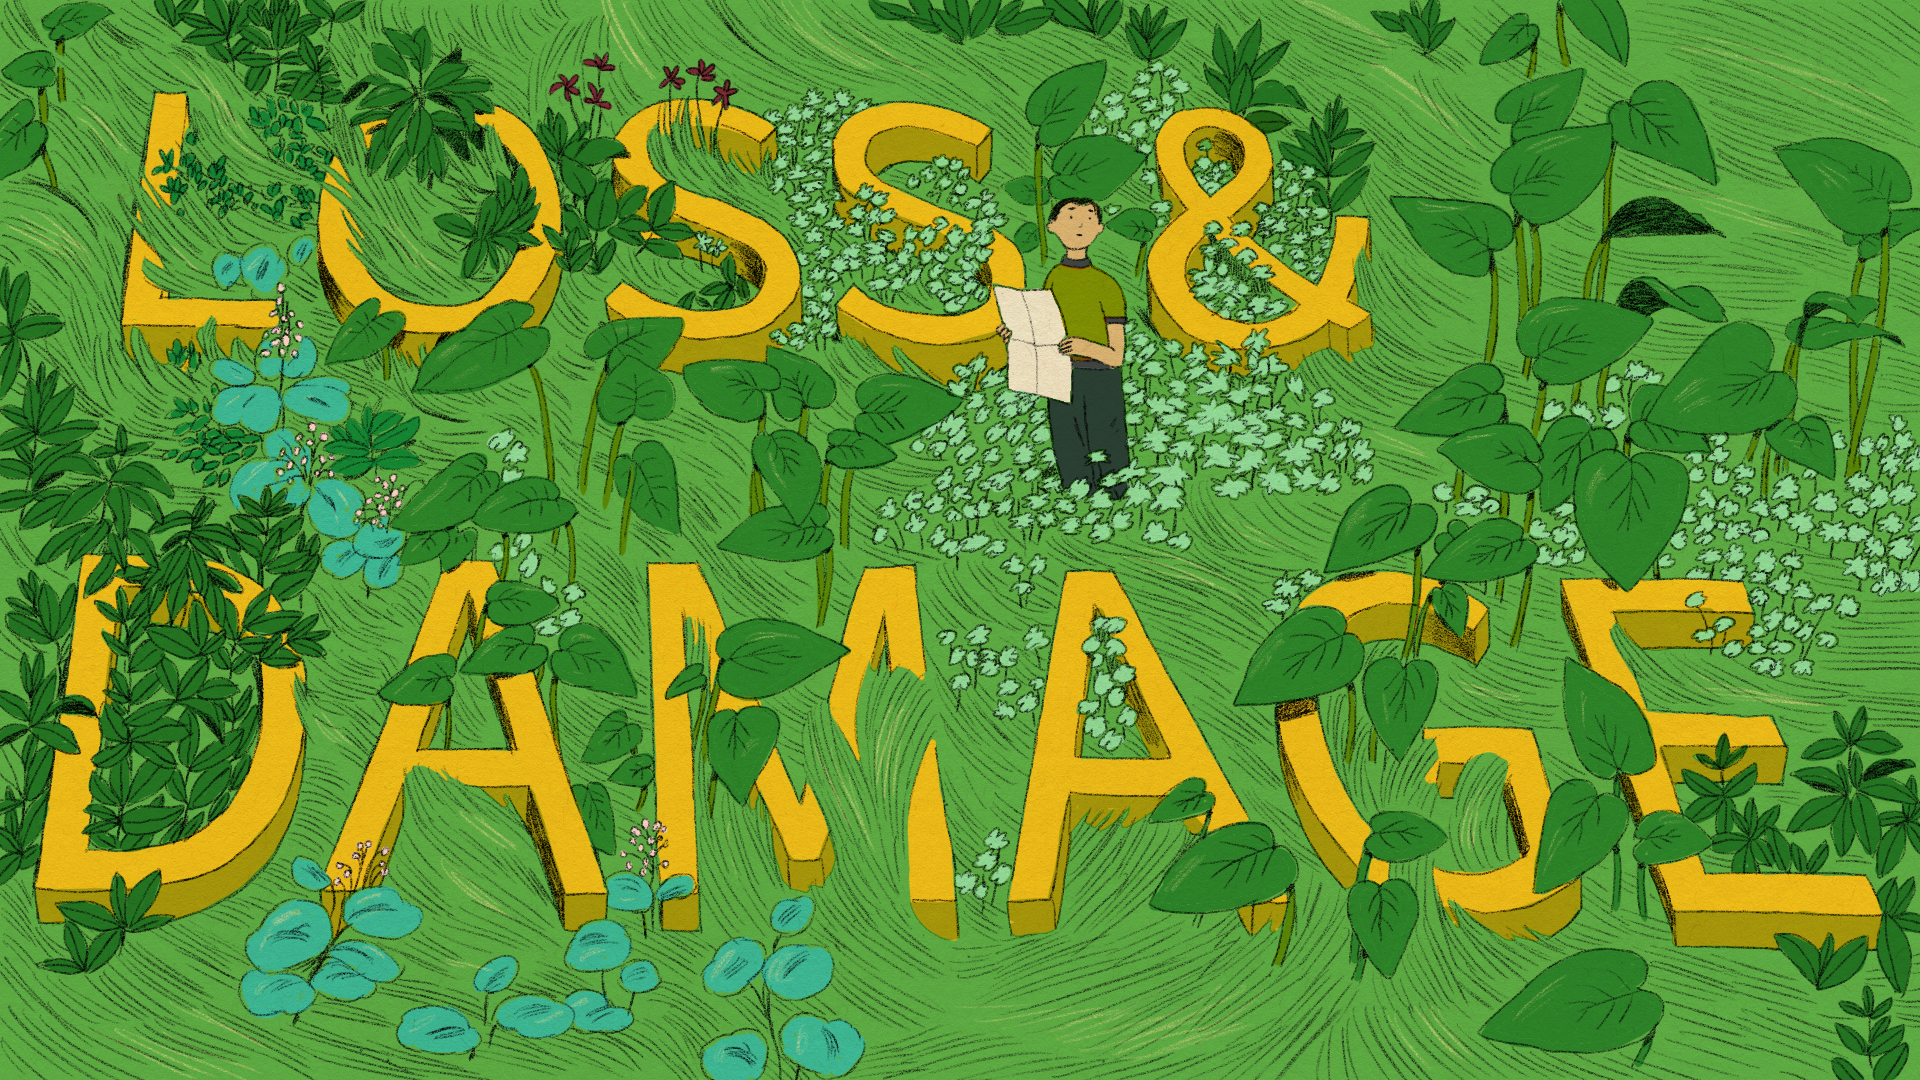 An illustration of a man holding a map in the middle of overwhelming greenery. Half-hidden in the greenery are the words “Loss &amp; Damage.”